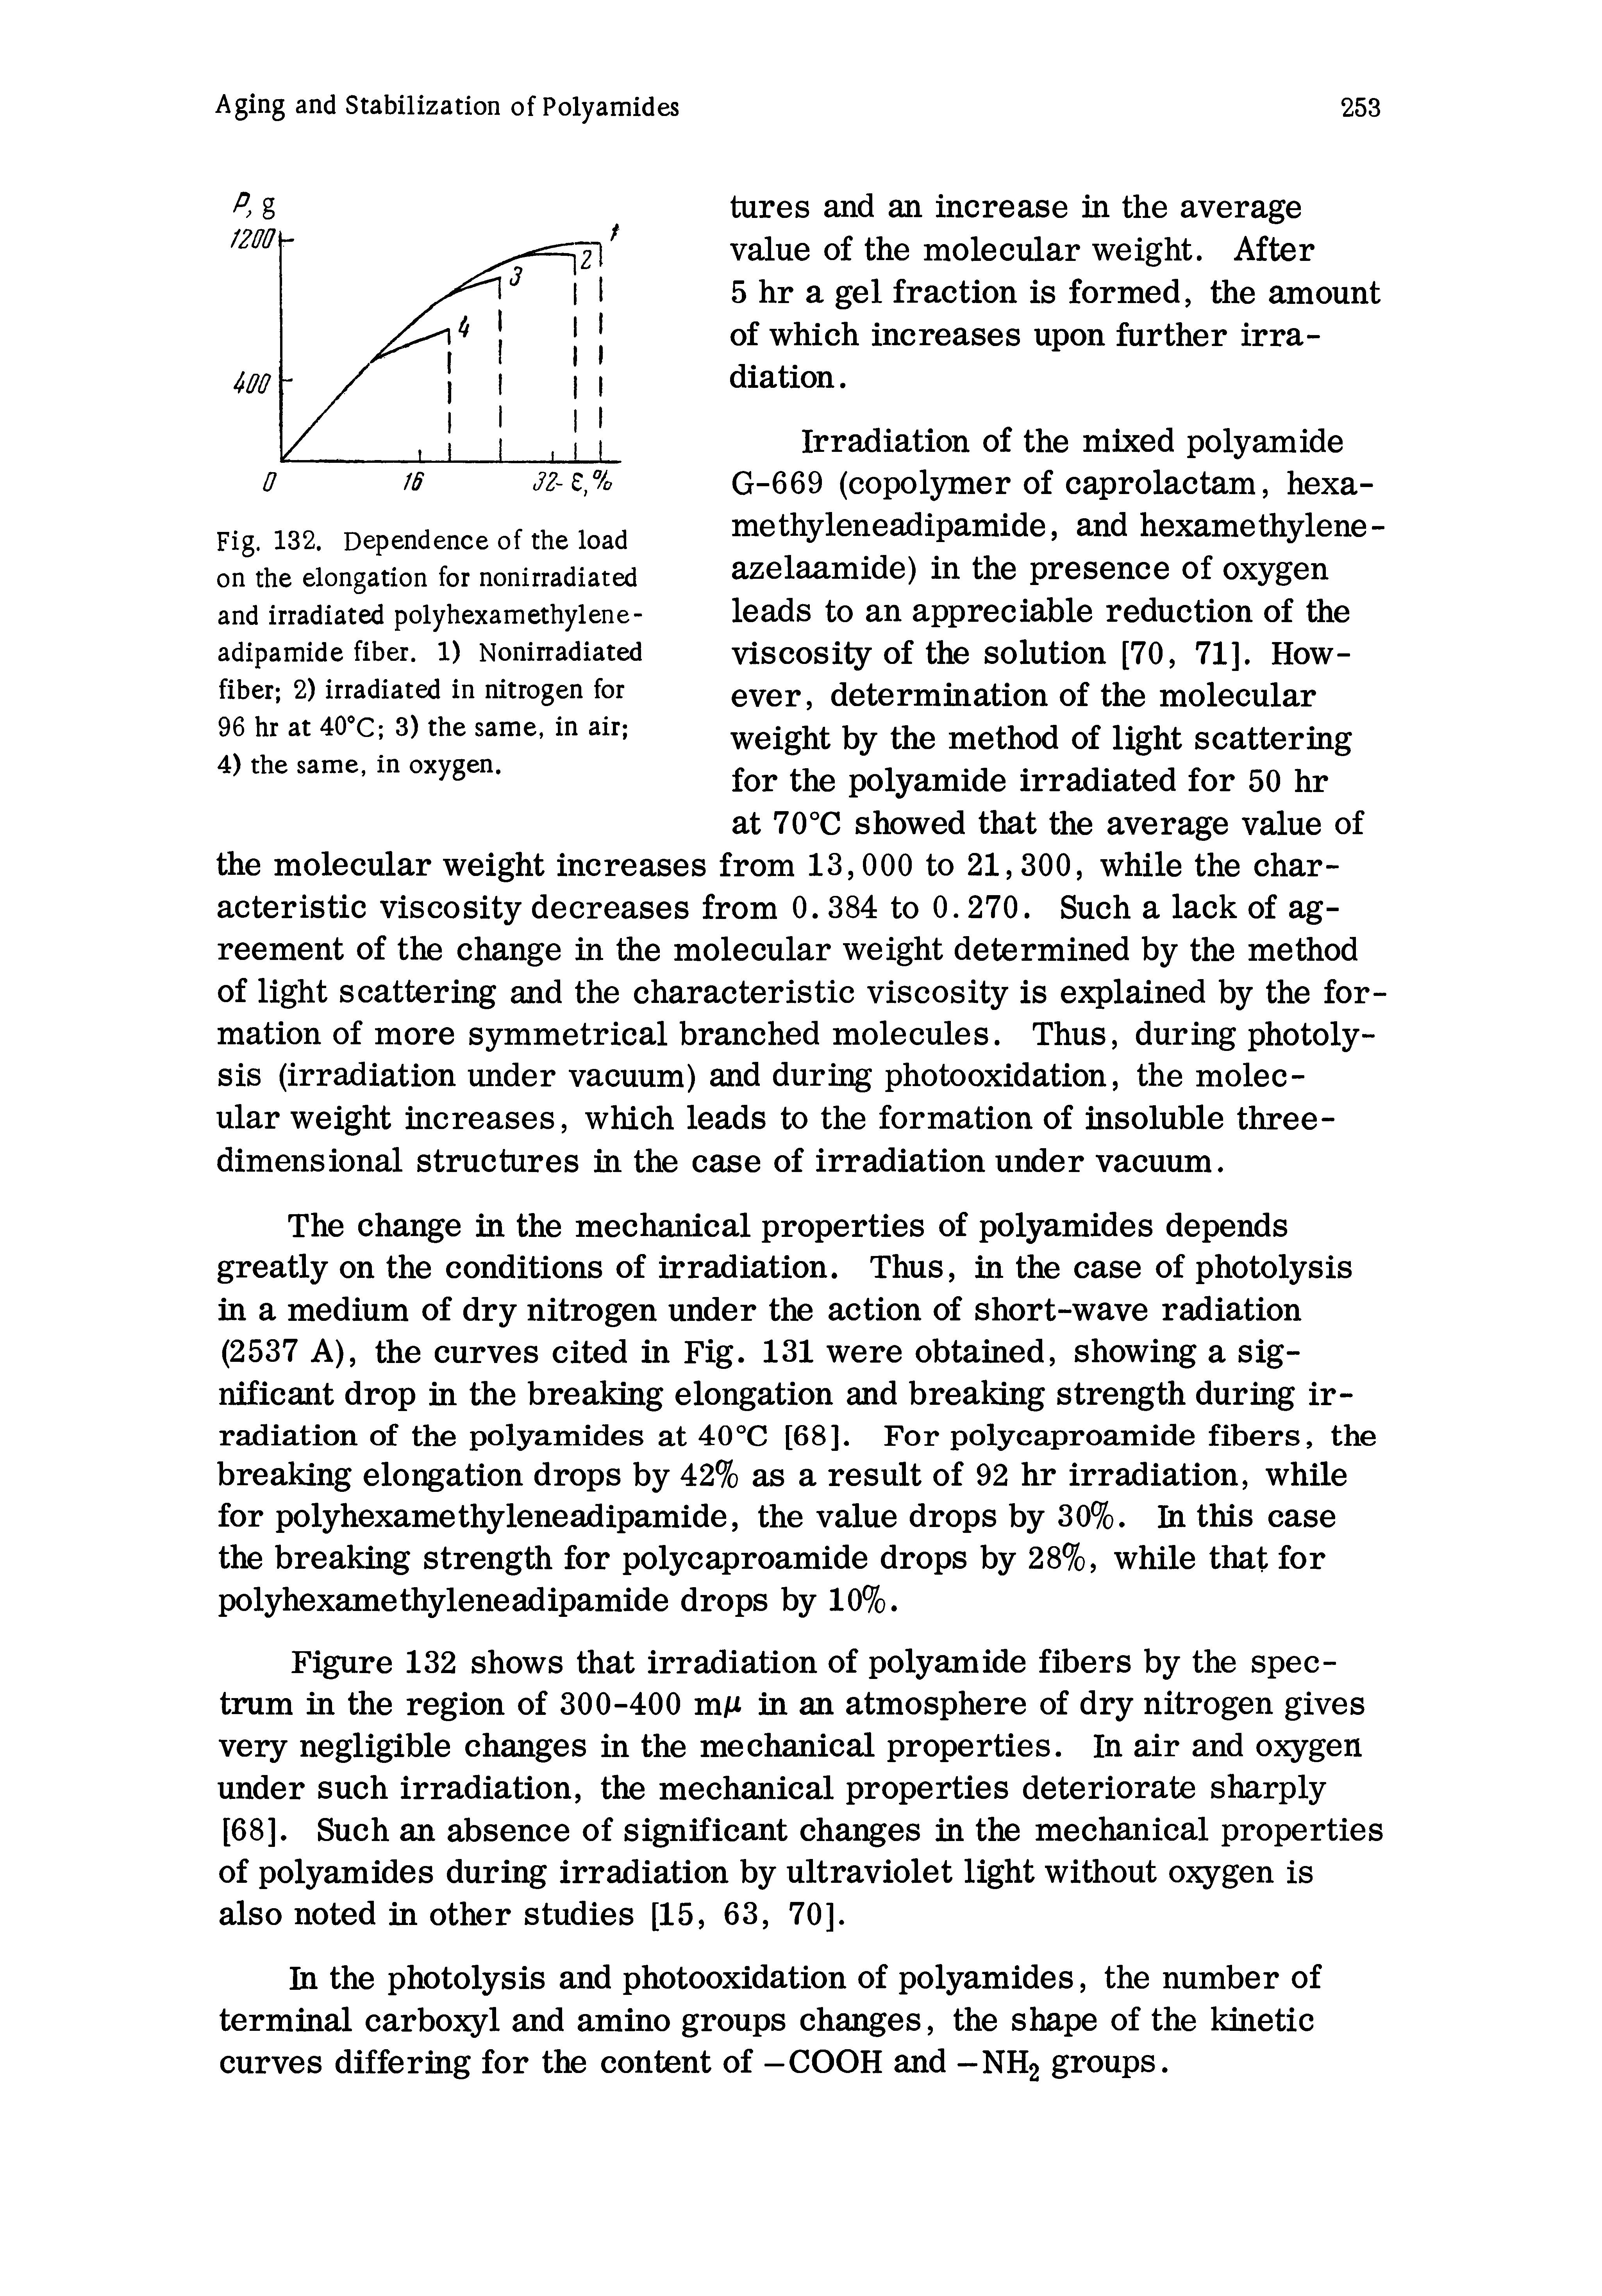 Fig. 132. Dependence of the load on the elongation for nonirradiated and irradiated polyhexamethylene-adipamide fiber. 1) Nonirradiated fiber 2) irradiated in nitrogen for 96 hr at 40°C 3) the same, in air 4) the same, in oxygen.